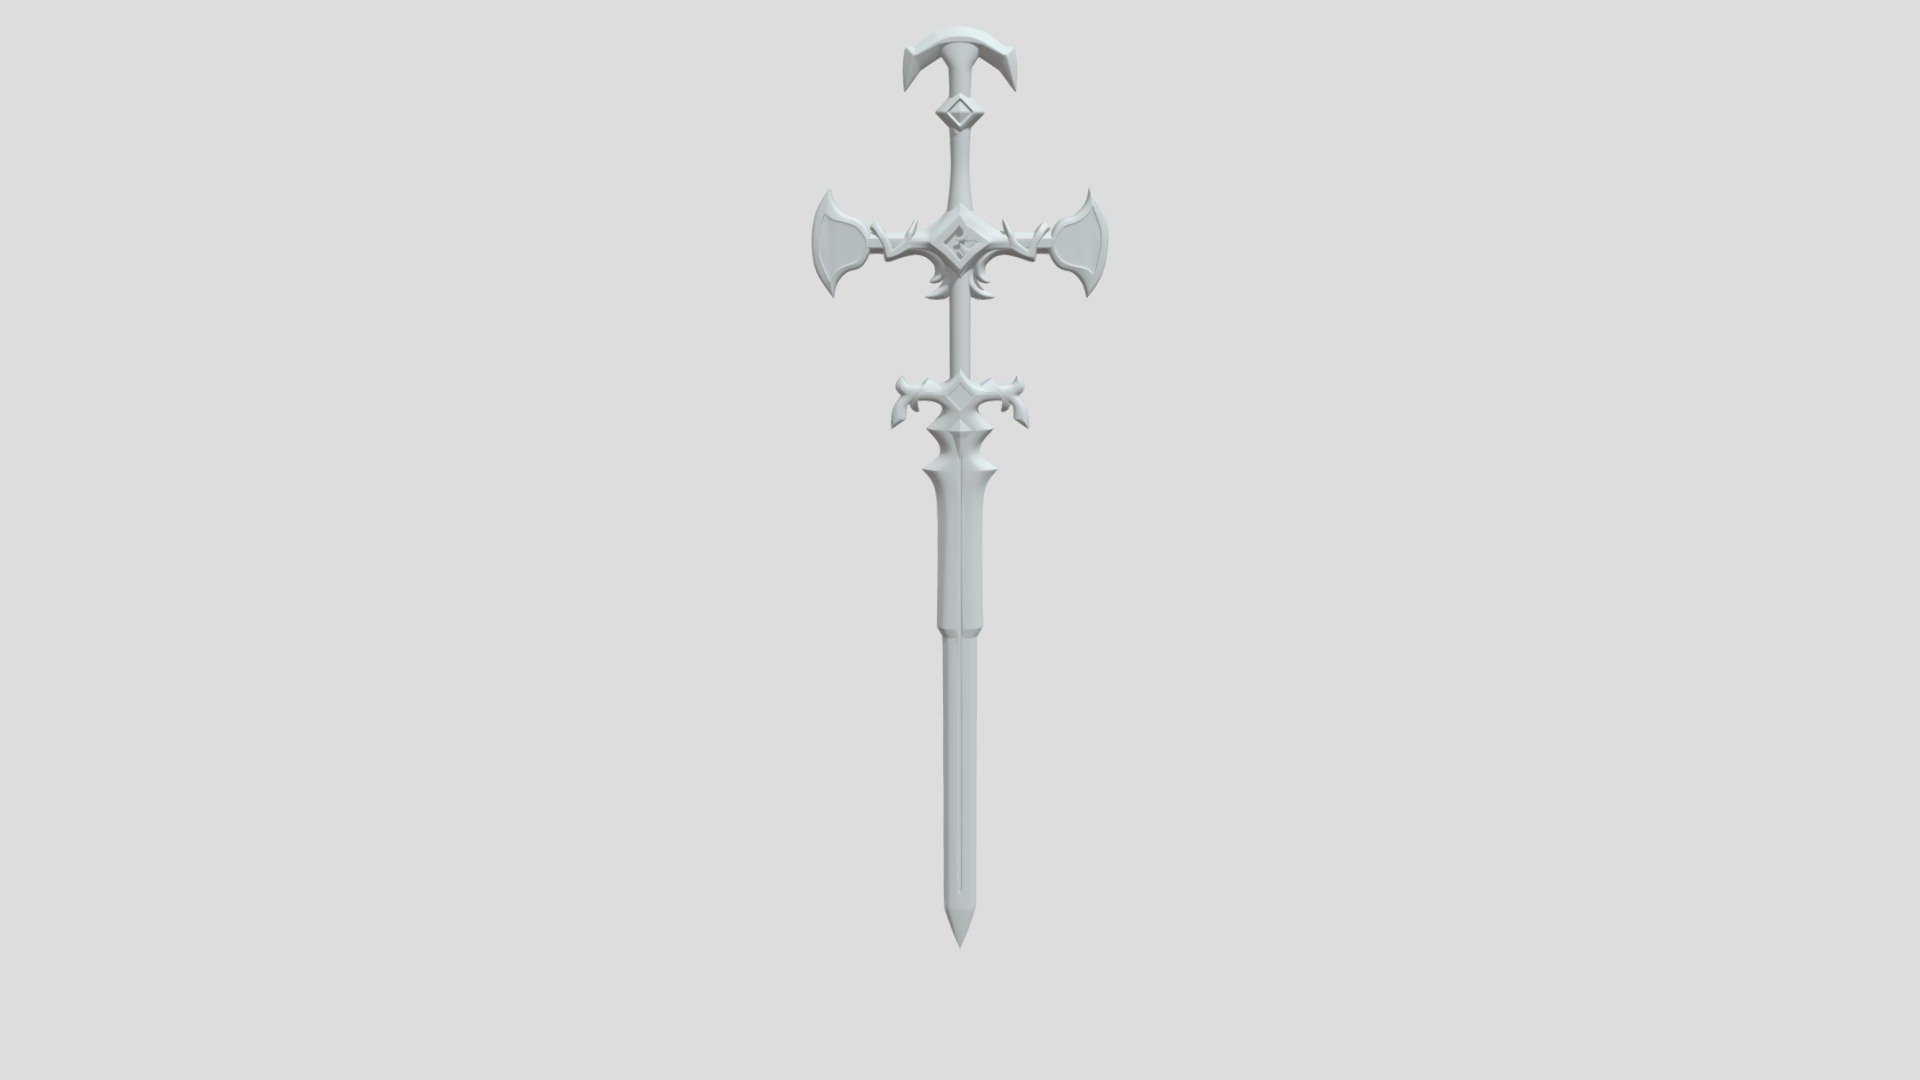 3D Printable viego sword from League of Legends - Viego League of Legends 3D Printable Sword - 3D model by LLOYDO 3d model